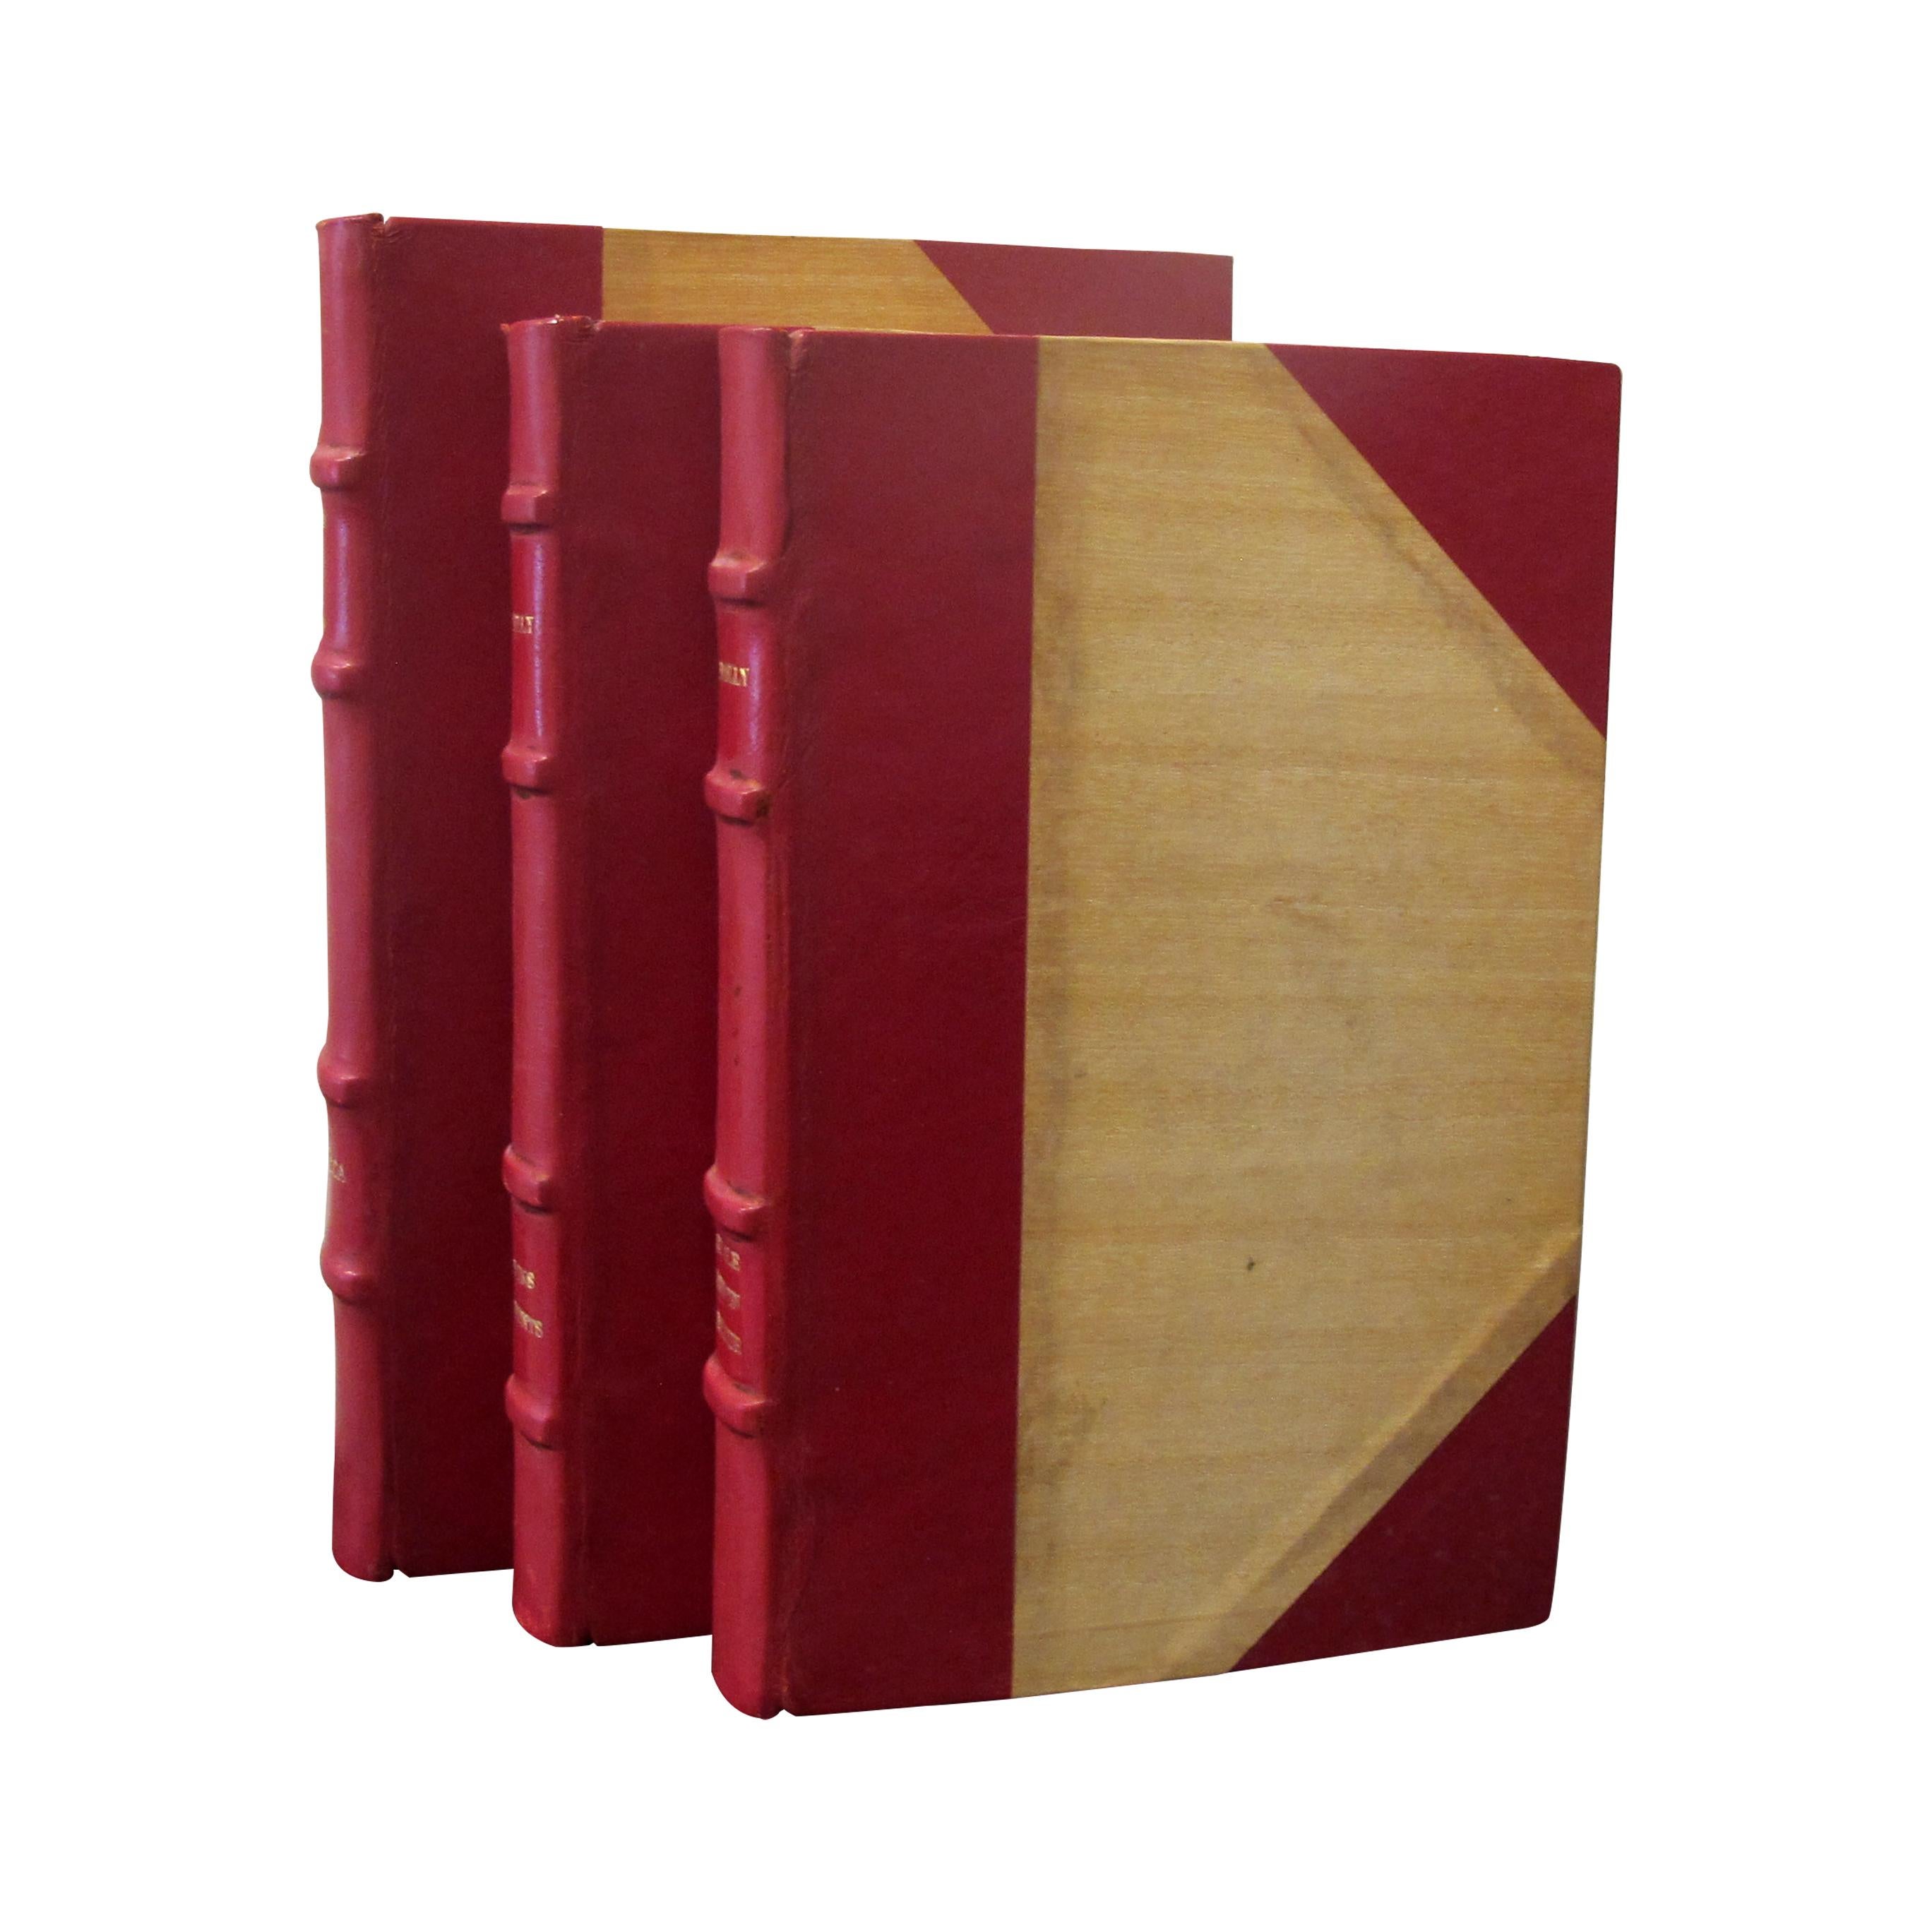 Other Set of 19 Early 20th Century French Novel Books Bound in Red Leather 1920s-1960s